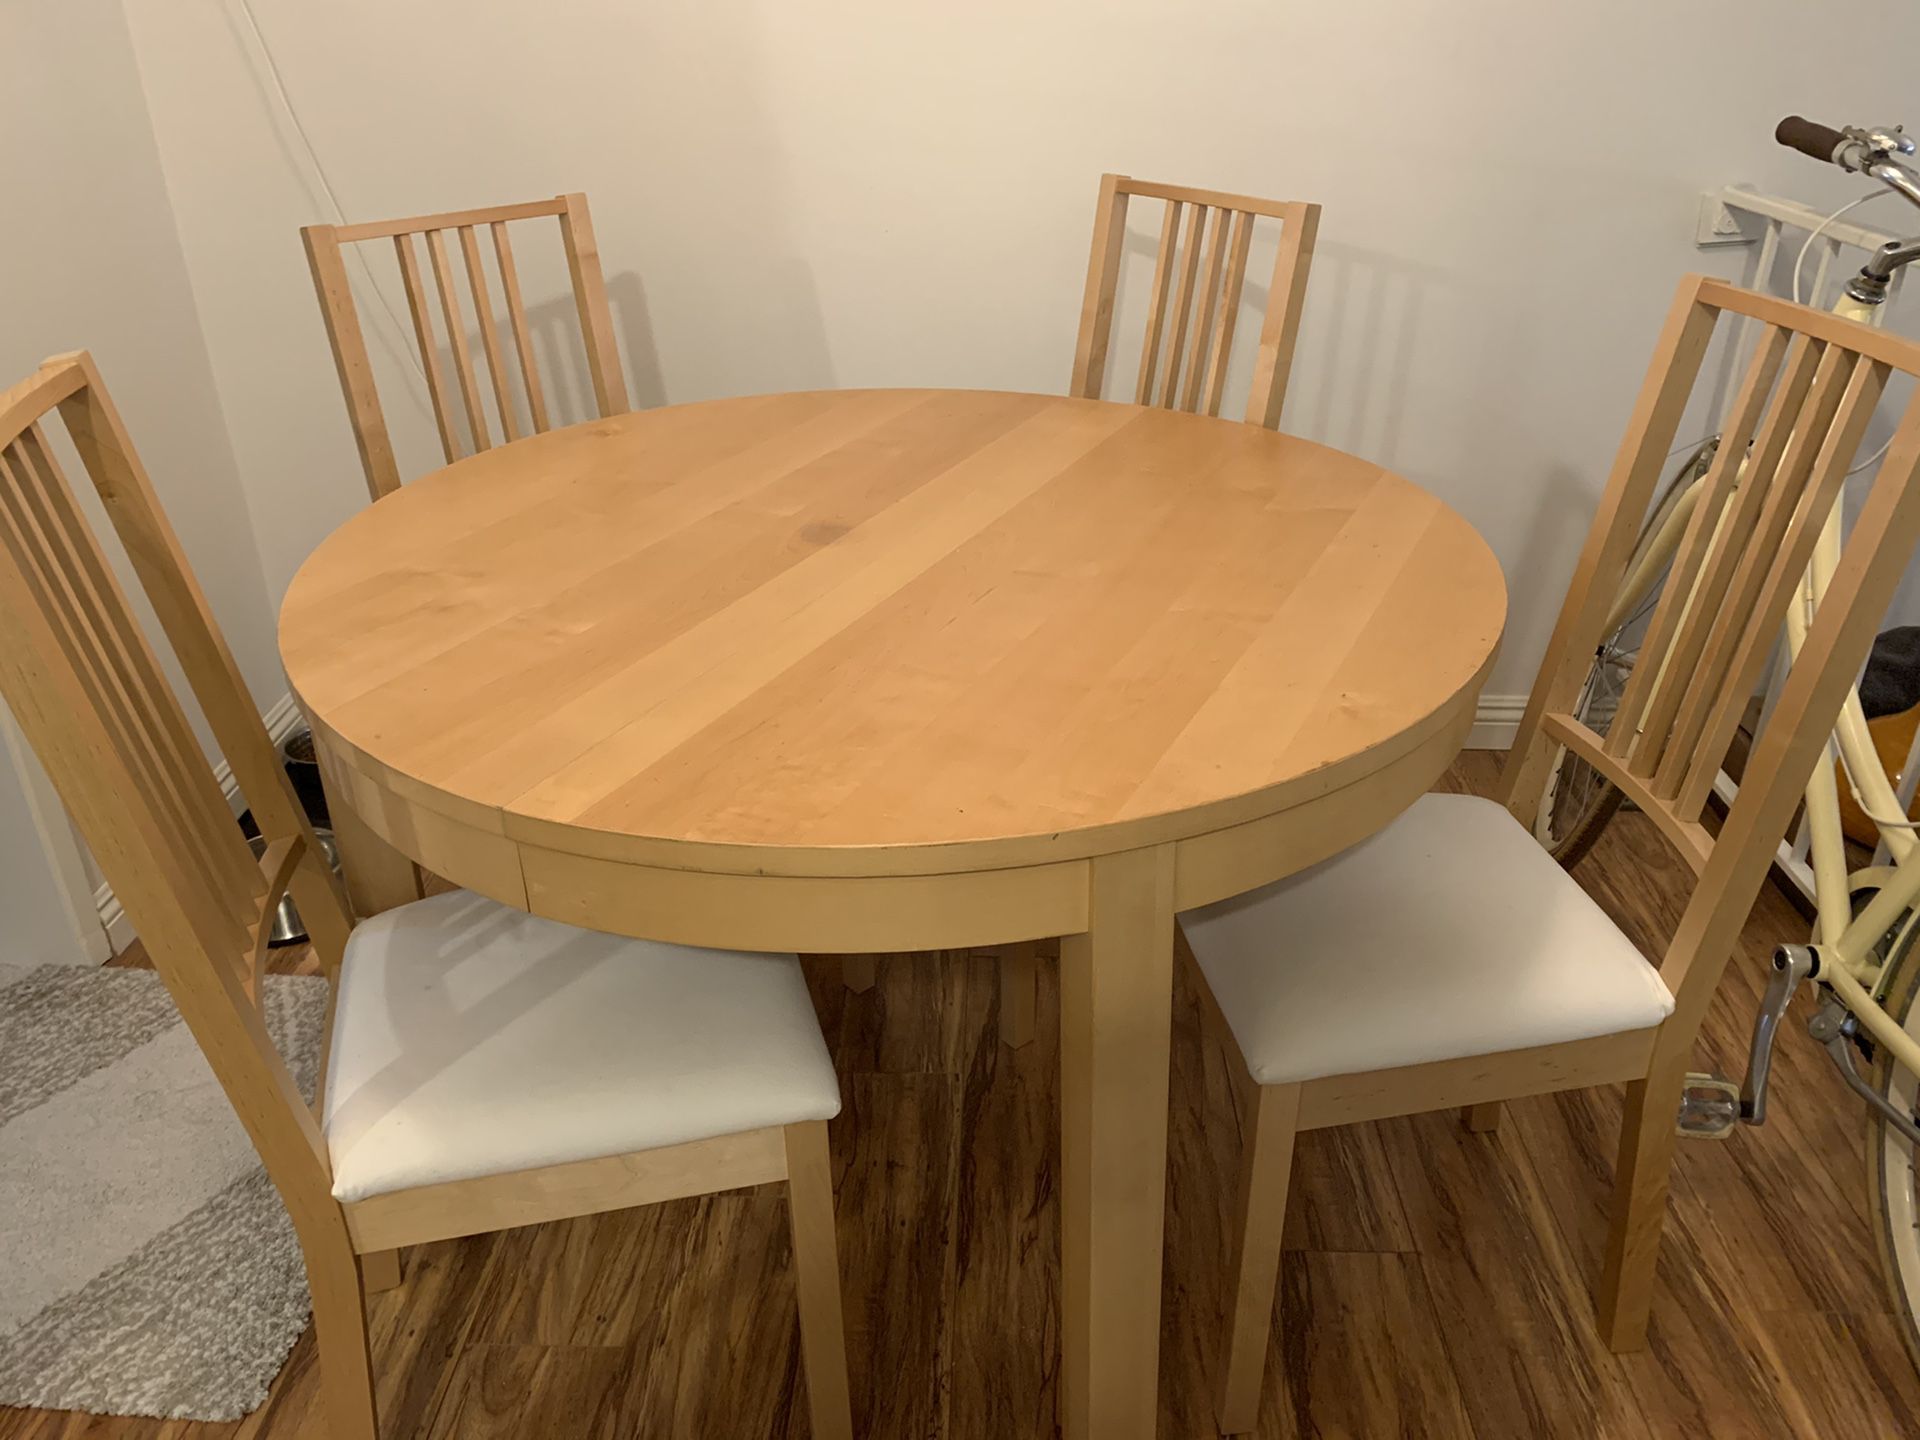 IKEA Bjursta dining table with matching 4 chairs - must pick up soon